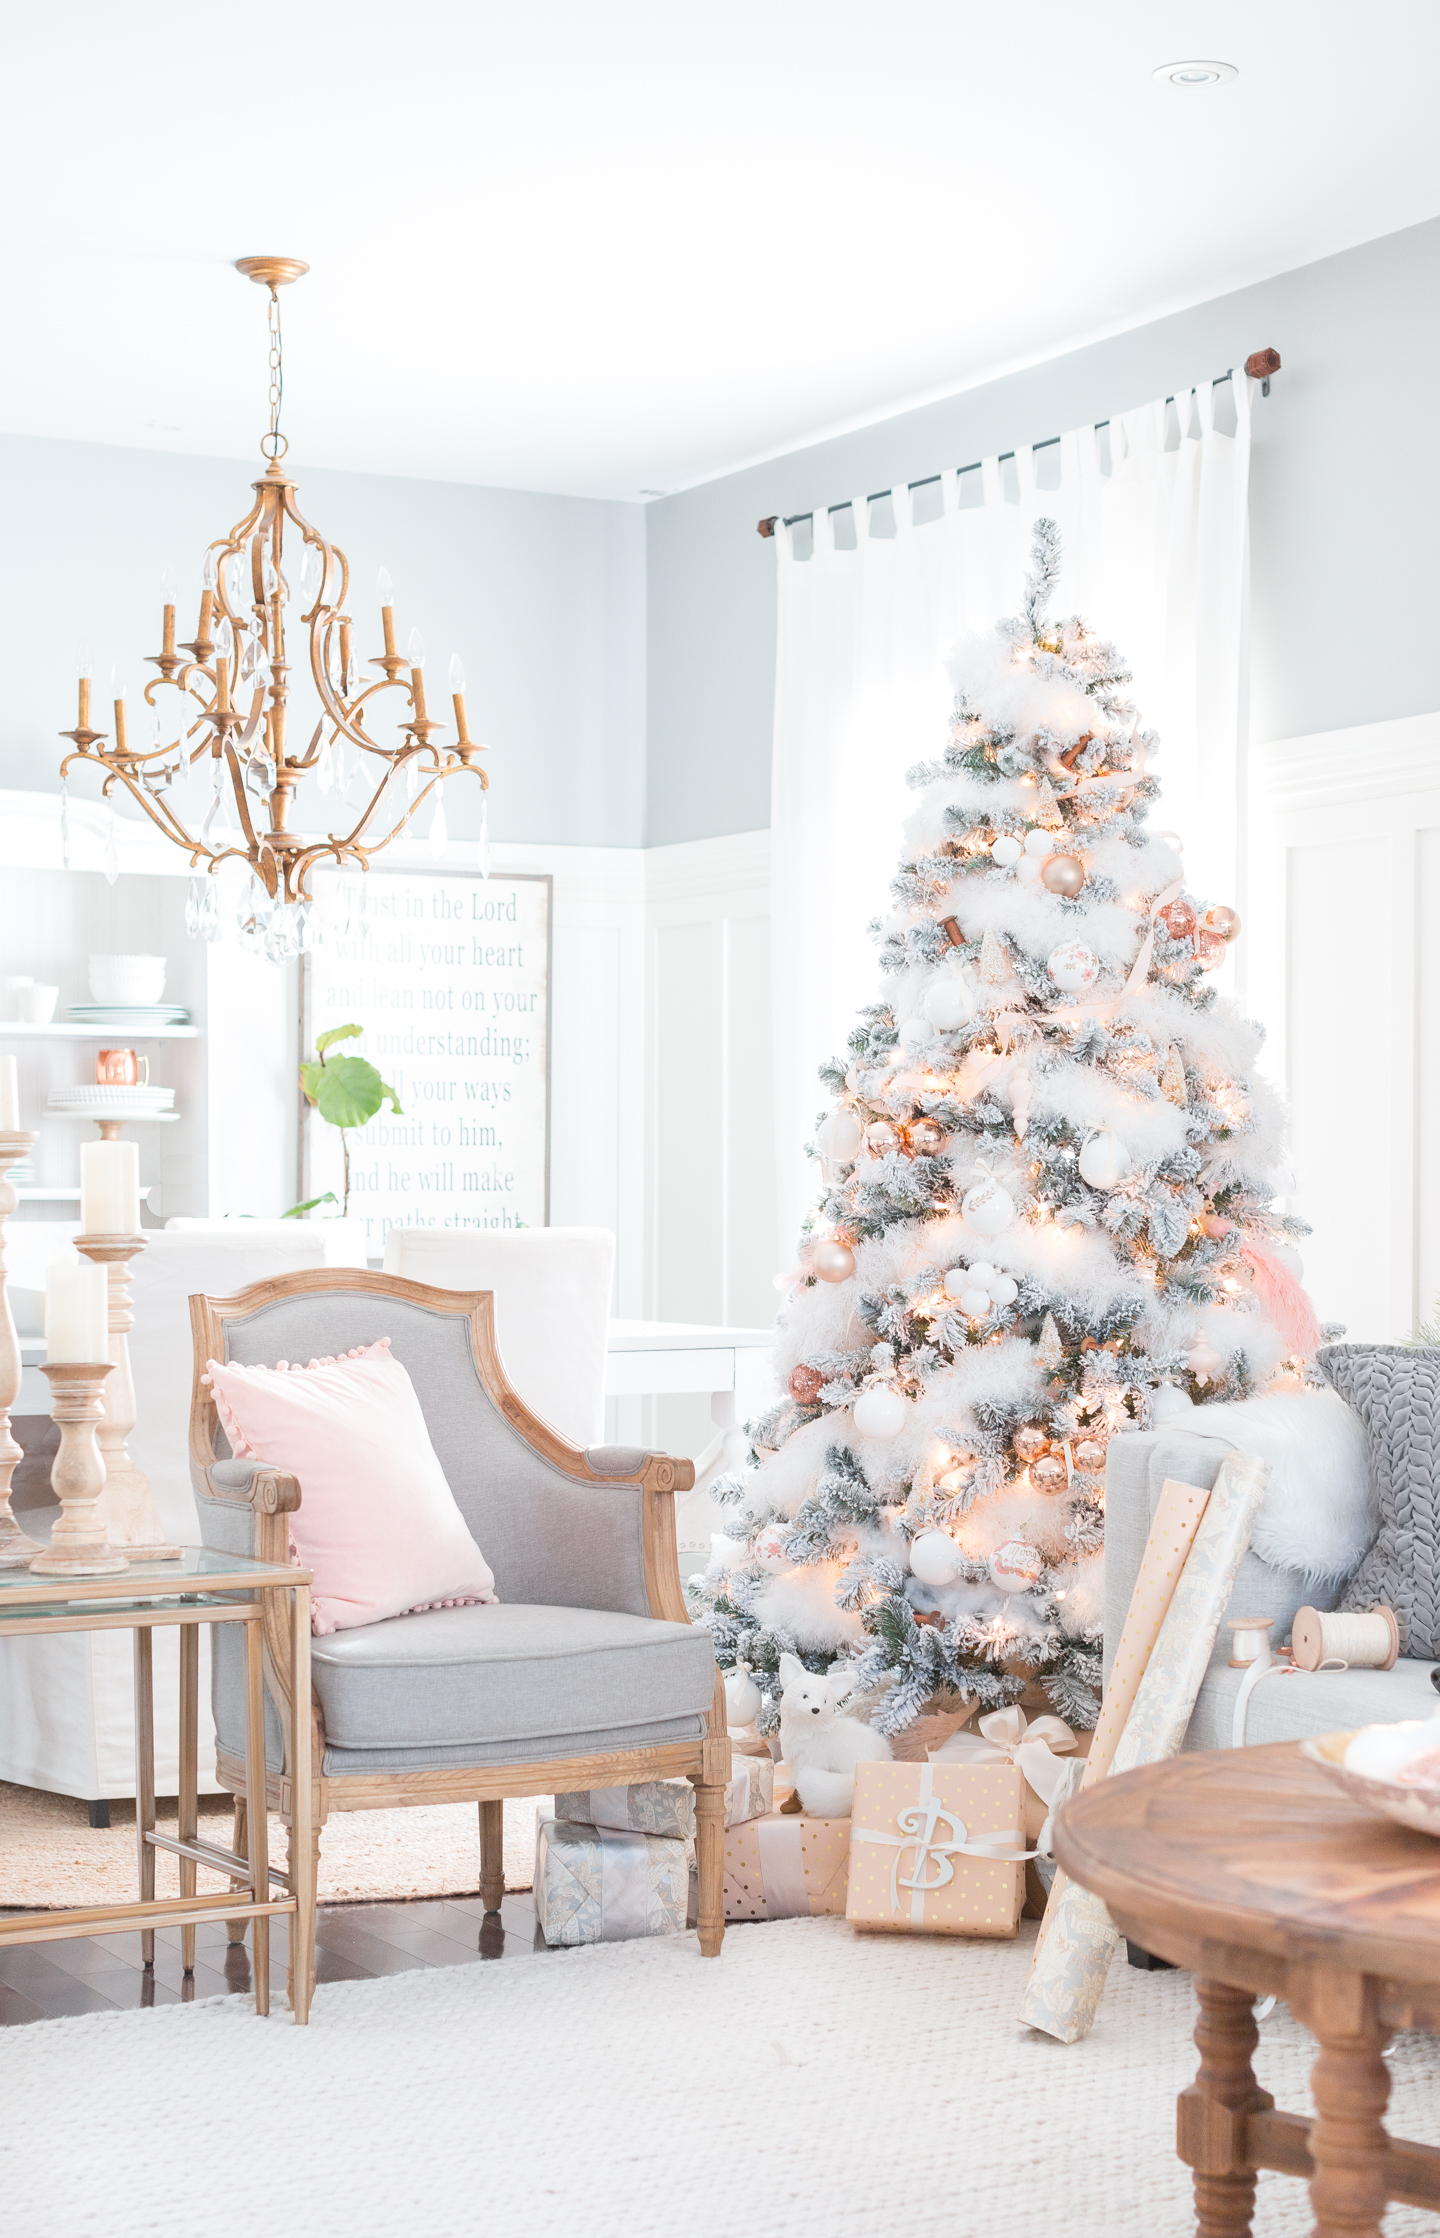 Elegant Christmas Decor in Blush, Rose Gold, and Copper